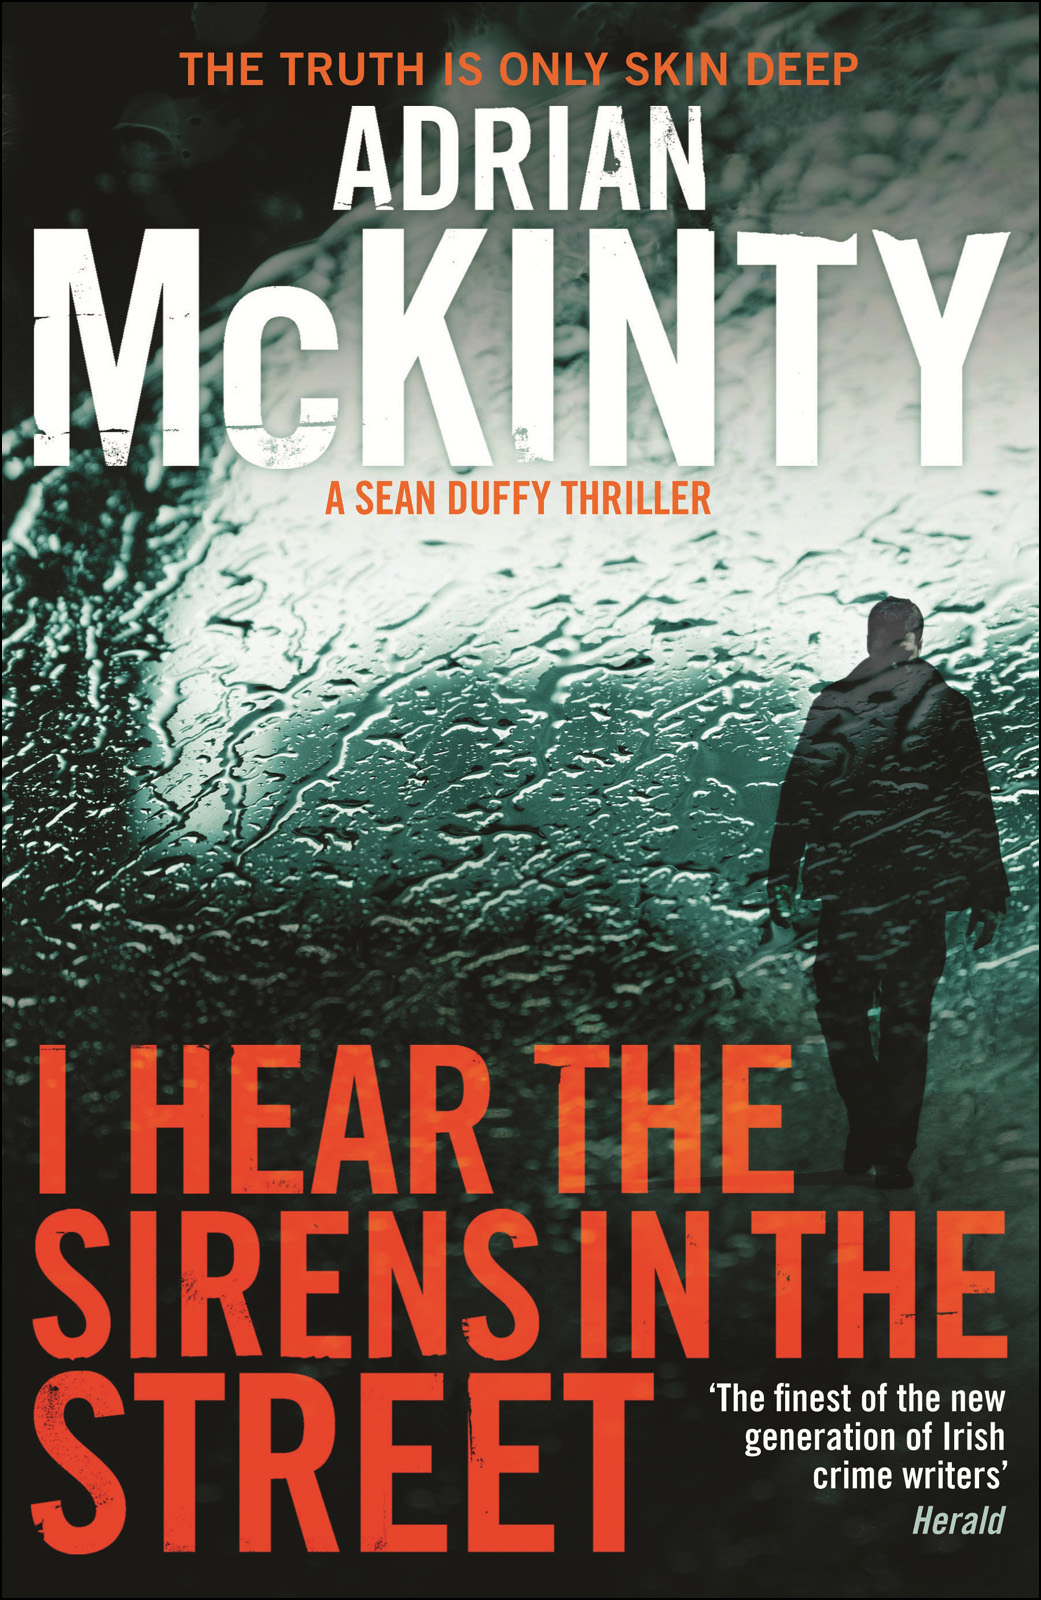 I Hear the Sirens in the Street (2013) by Adrian McKinty